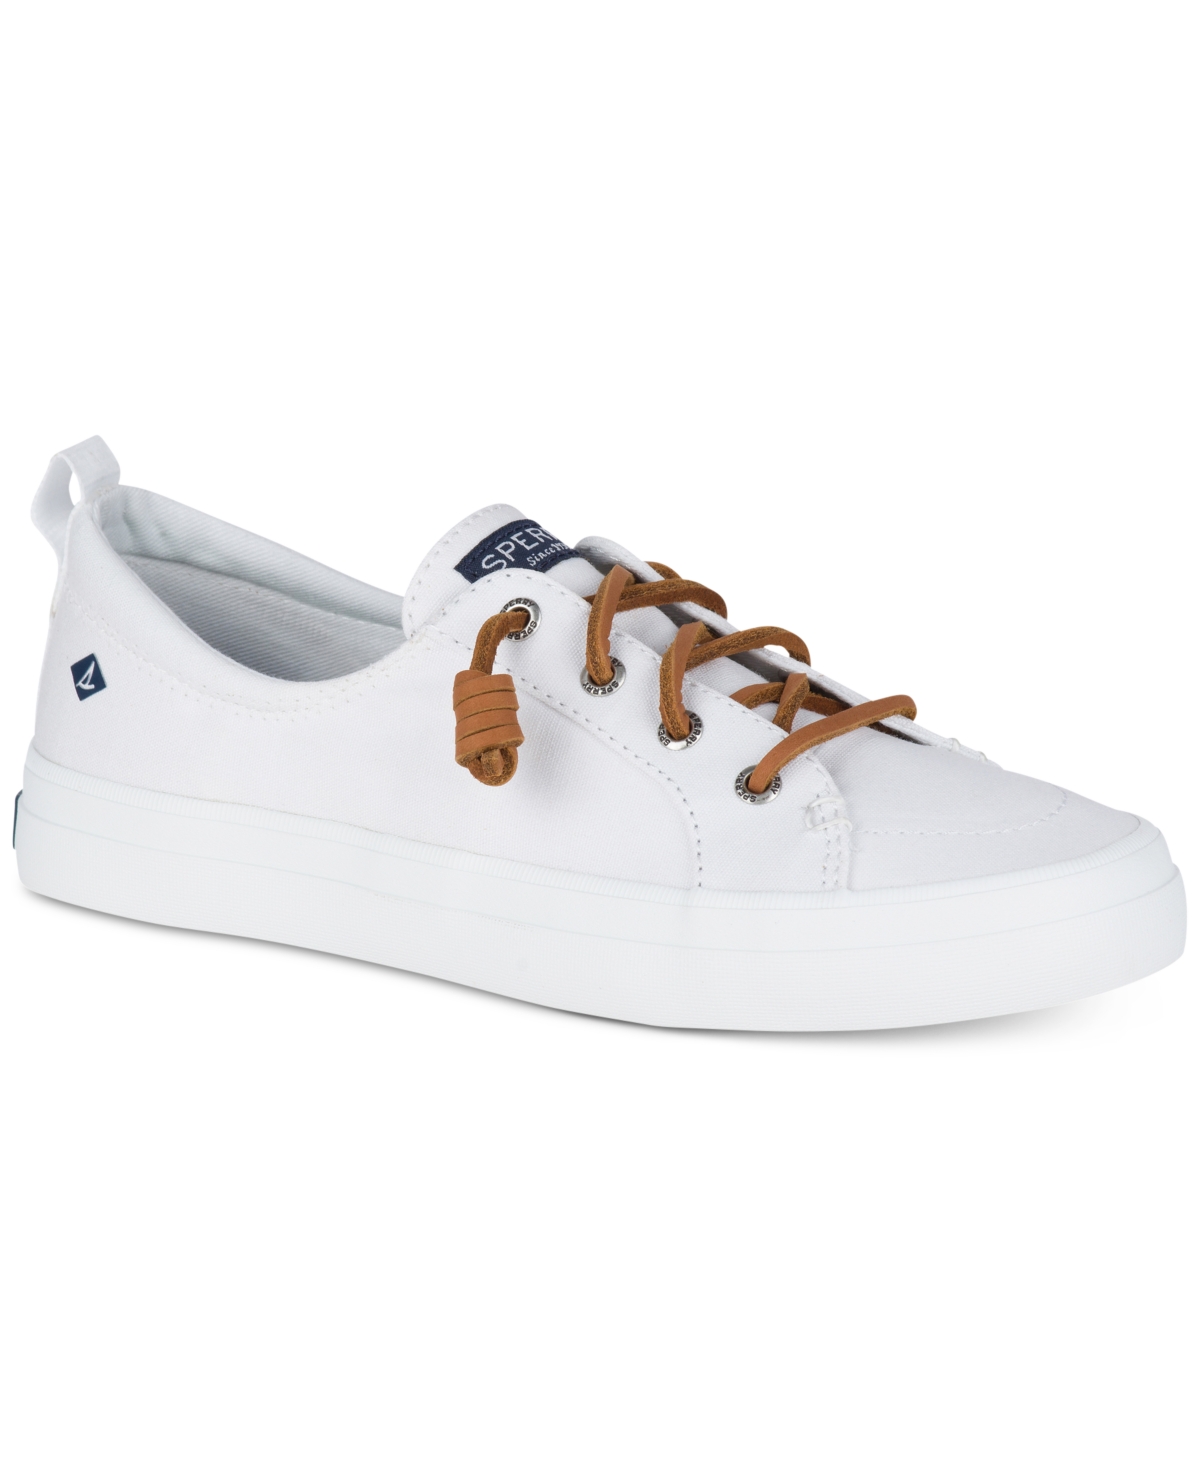 Women's Crest Vibe Canvas Sneakers, Created for Macy's - Oat